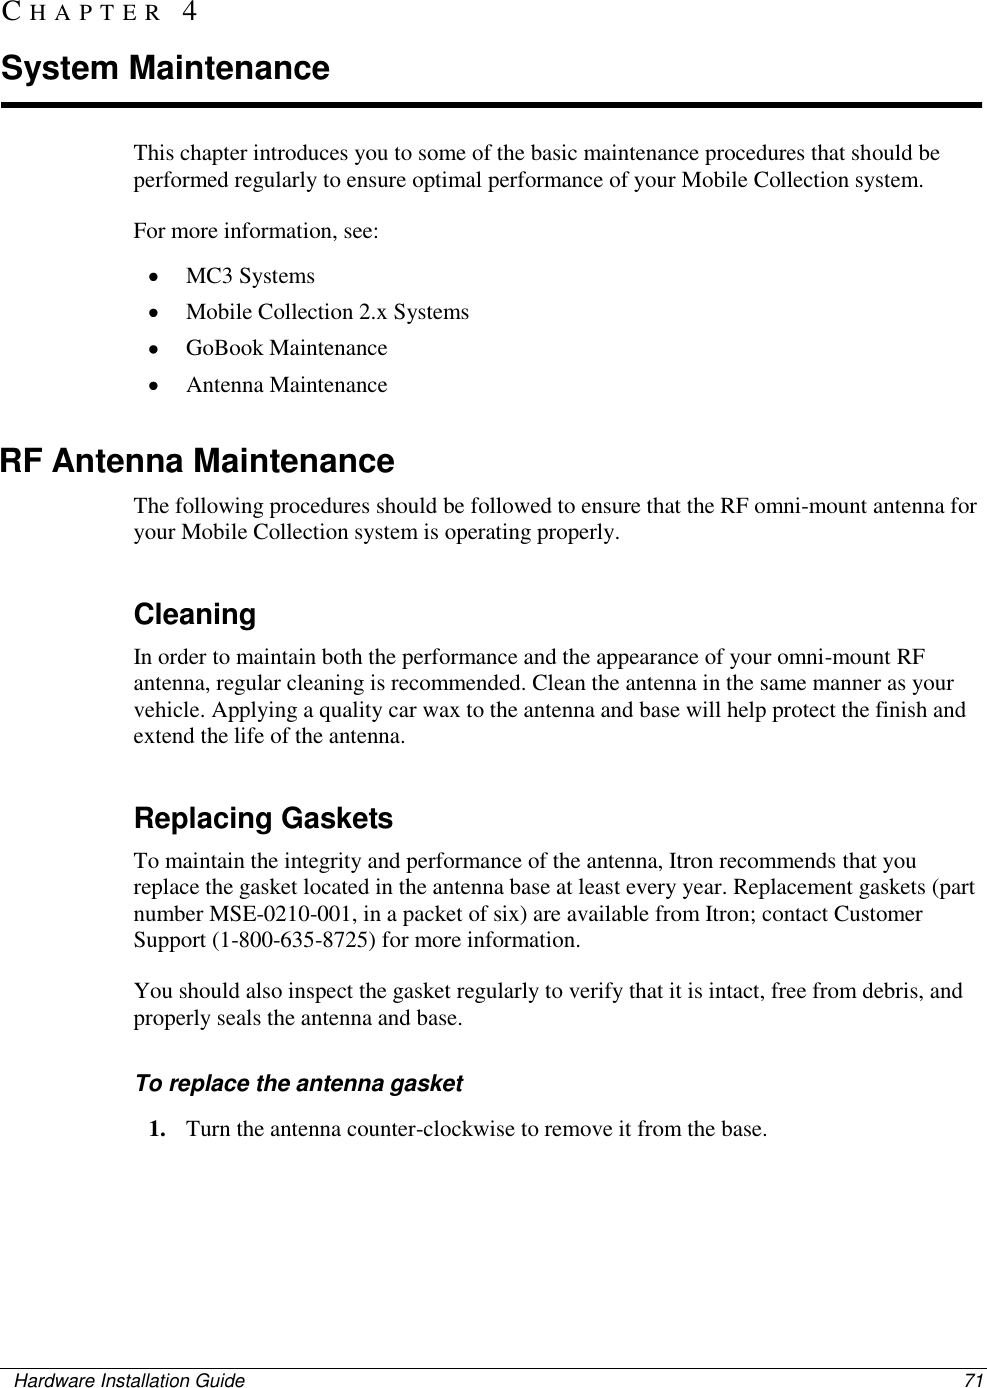    Hardware Installation Guide  71  This chapter introduces you to some of the basic maintenance procedures that should be performed regularly to ensure optimal performance of your Mobile Collection system.  For more information, see:  MC3 Systems  Mobile Collection 2.x Systems  GoBook Maintenance  Antenna Maintenance  RF Antenna Maintenance The following procedures should be followed to ensure that the RF omni-mount antenna for your Mobile Collection system is operating properly.   Cleaning In order to maintain both the performance and the appearance of your omni-mount RF antenna, regular cleaning is recommended. Clean the antenna in the same manner as your vehicle. Applying a quality car wax to the antenna and base will help protect the finish and extend the life of the antenna.   Replacing Gaskets To maintain the integrity and performance of the antenna, Itron recommends that you replace the gasket located in the antenna base at least every year. Replacement gaskets (part number MSE-0210-001, in a packet of six) are available from Itron; contact Customer Support (1-800-635-8725) for more information.  You should also inspect the gasket regularly to verify that it is intact, free from debris, and properly seals the antenna and base.   To replace the antenna gasket 1. Turn the antenna counter-clockwise to remove it from the base.  CH A P T E R   4  System Maintenance 